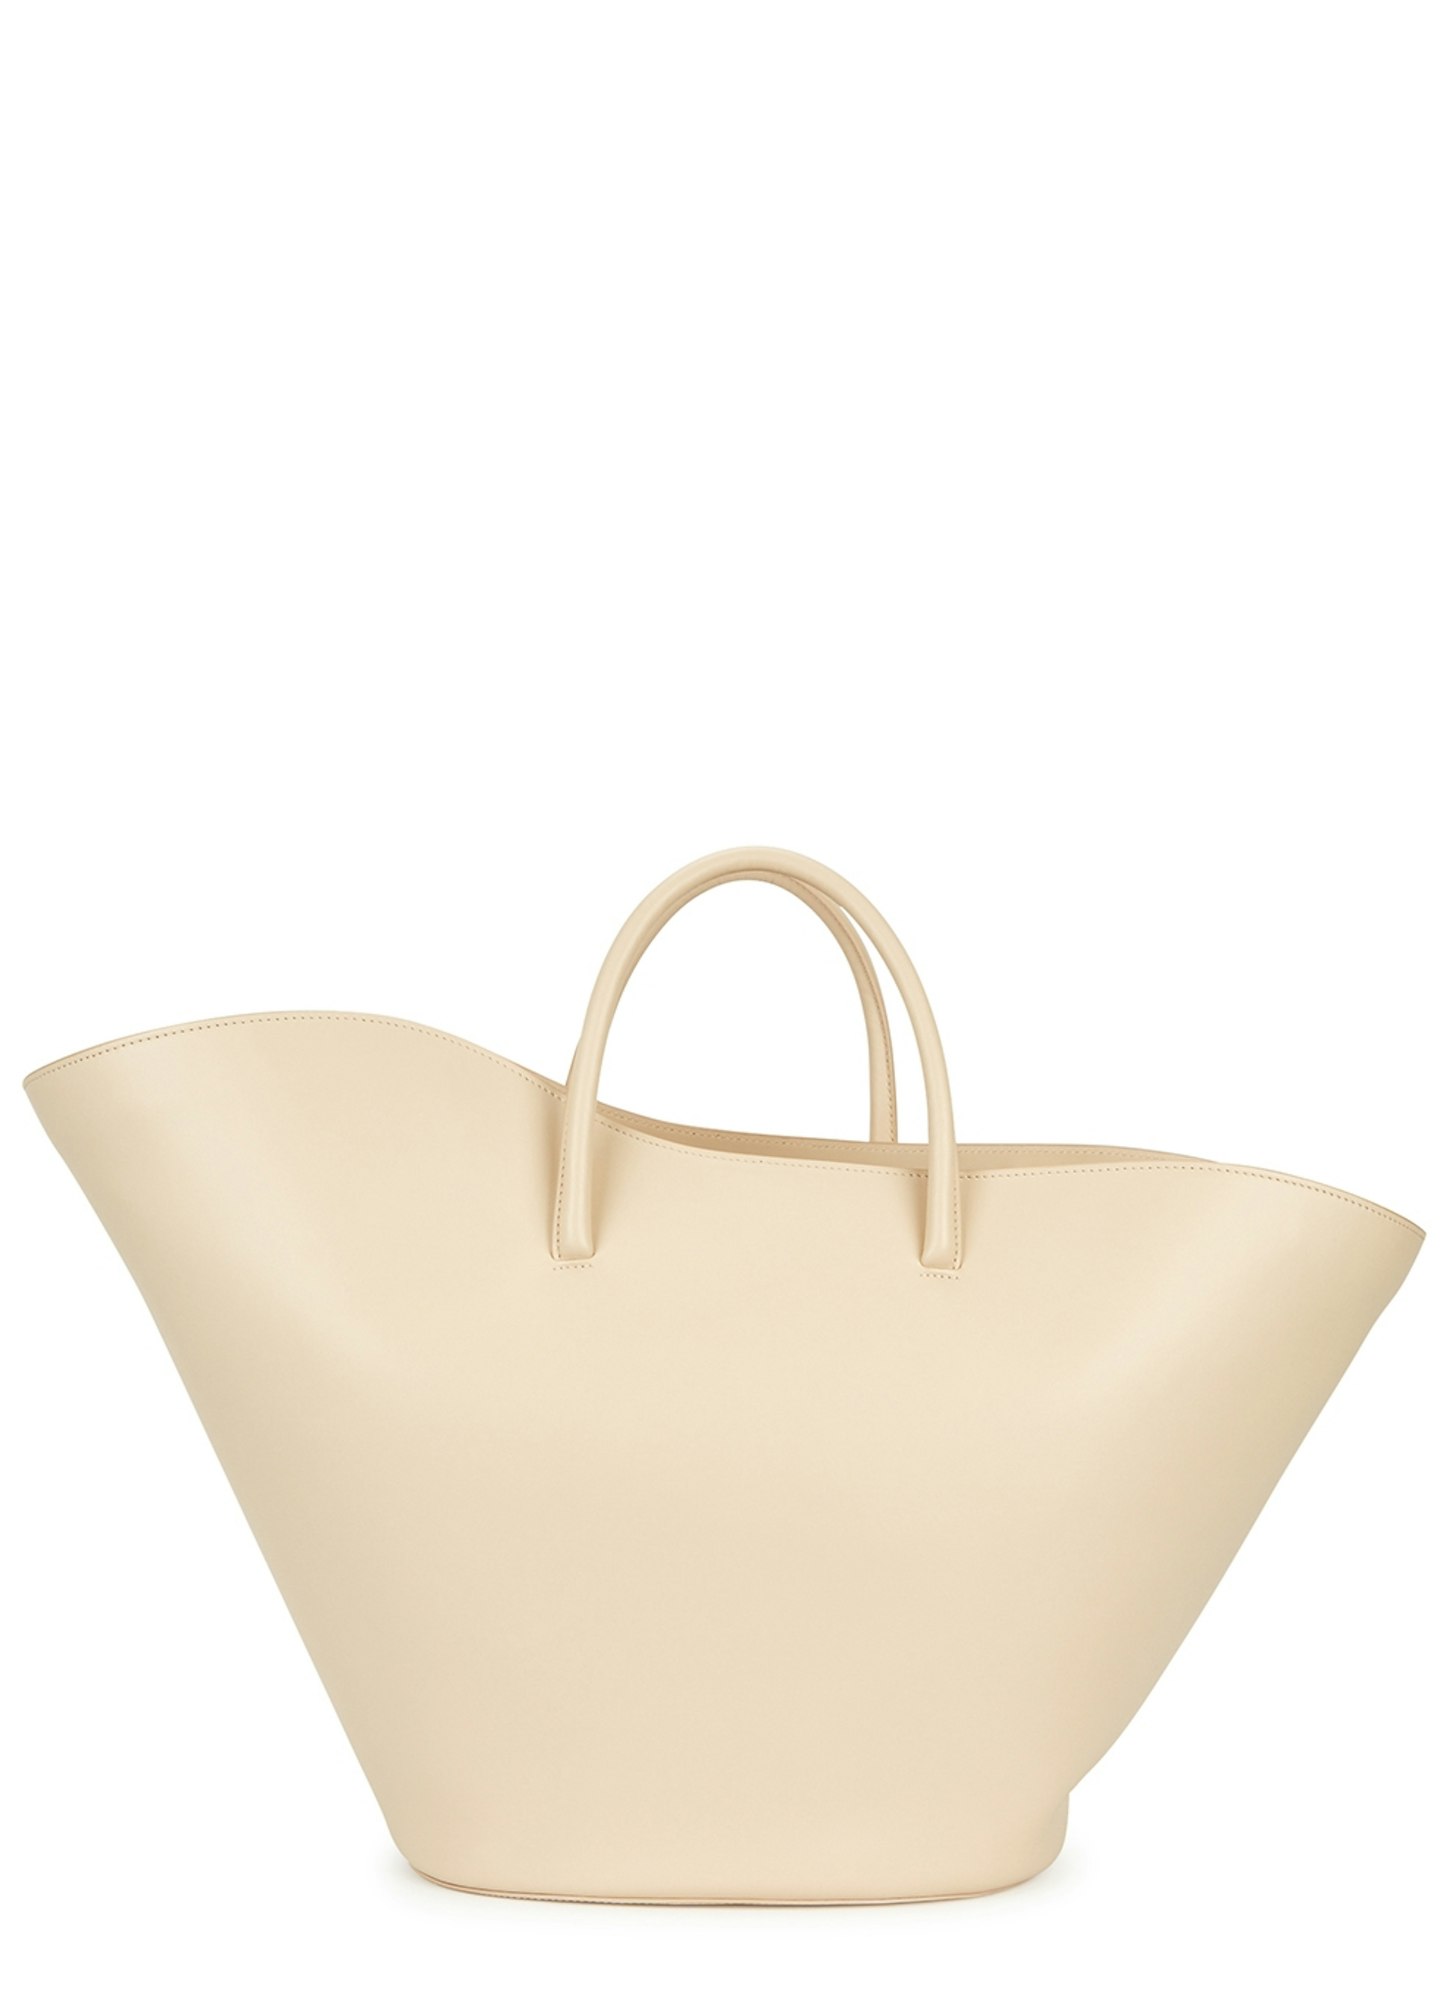 Little Lifner, Tulip Ivory Leather Tote, £515